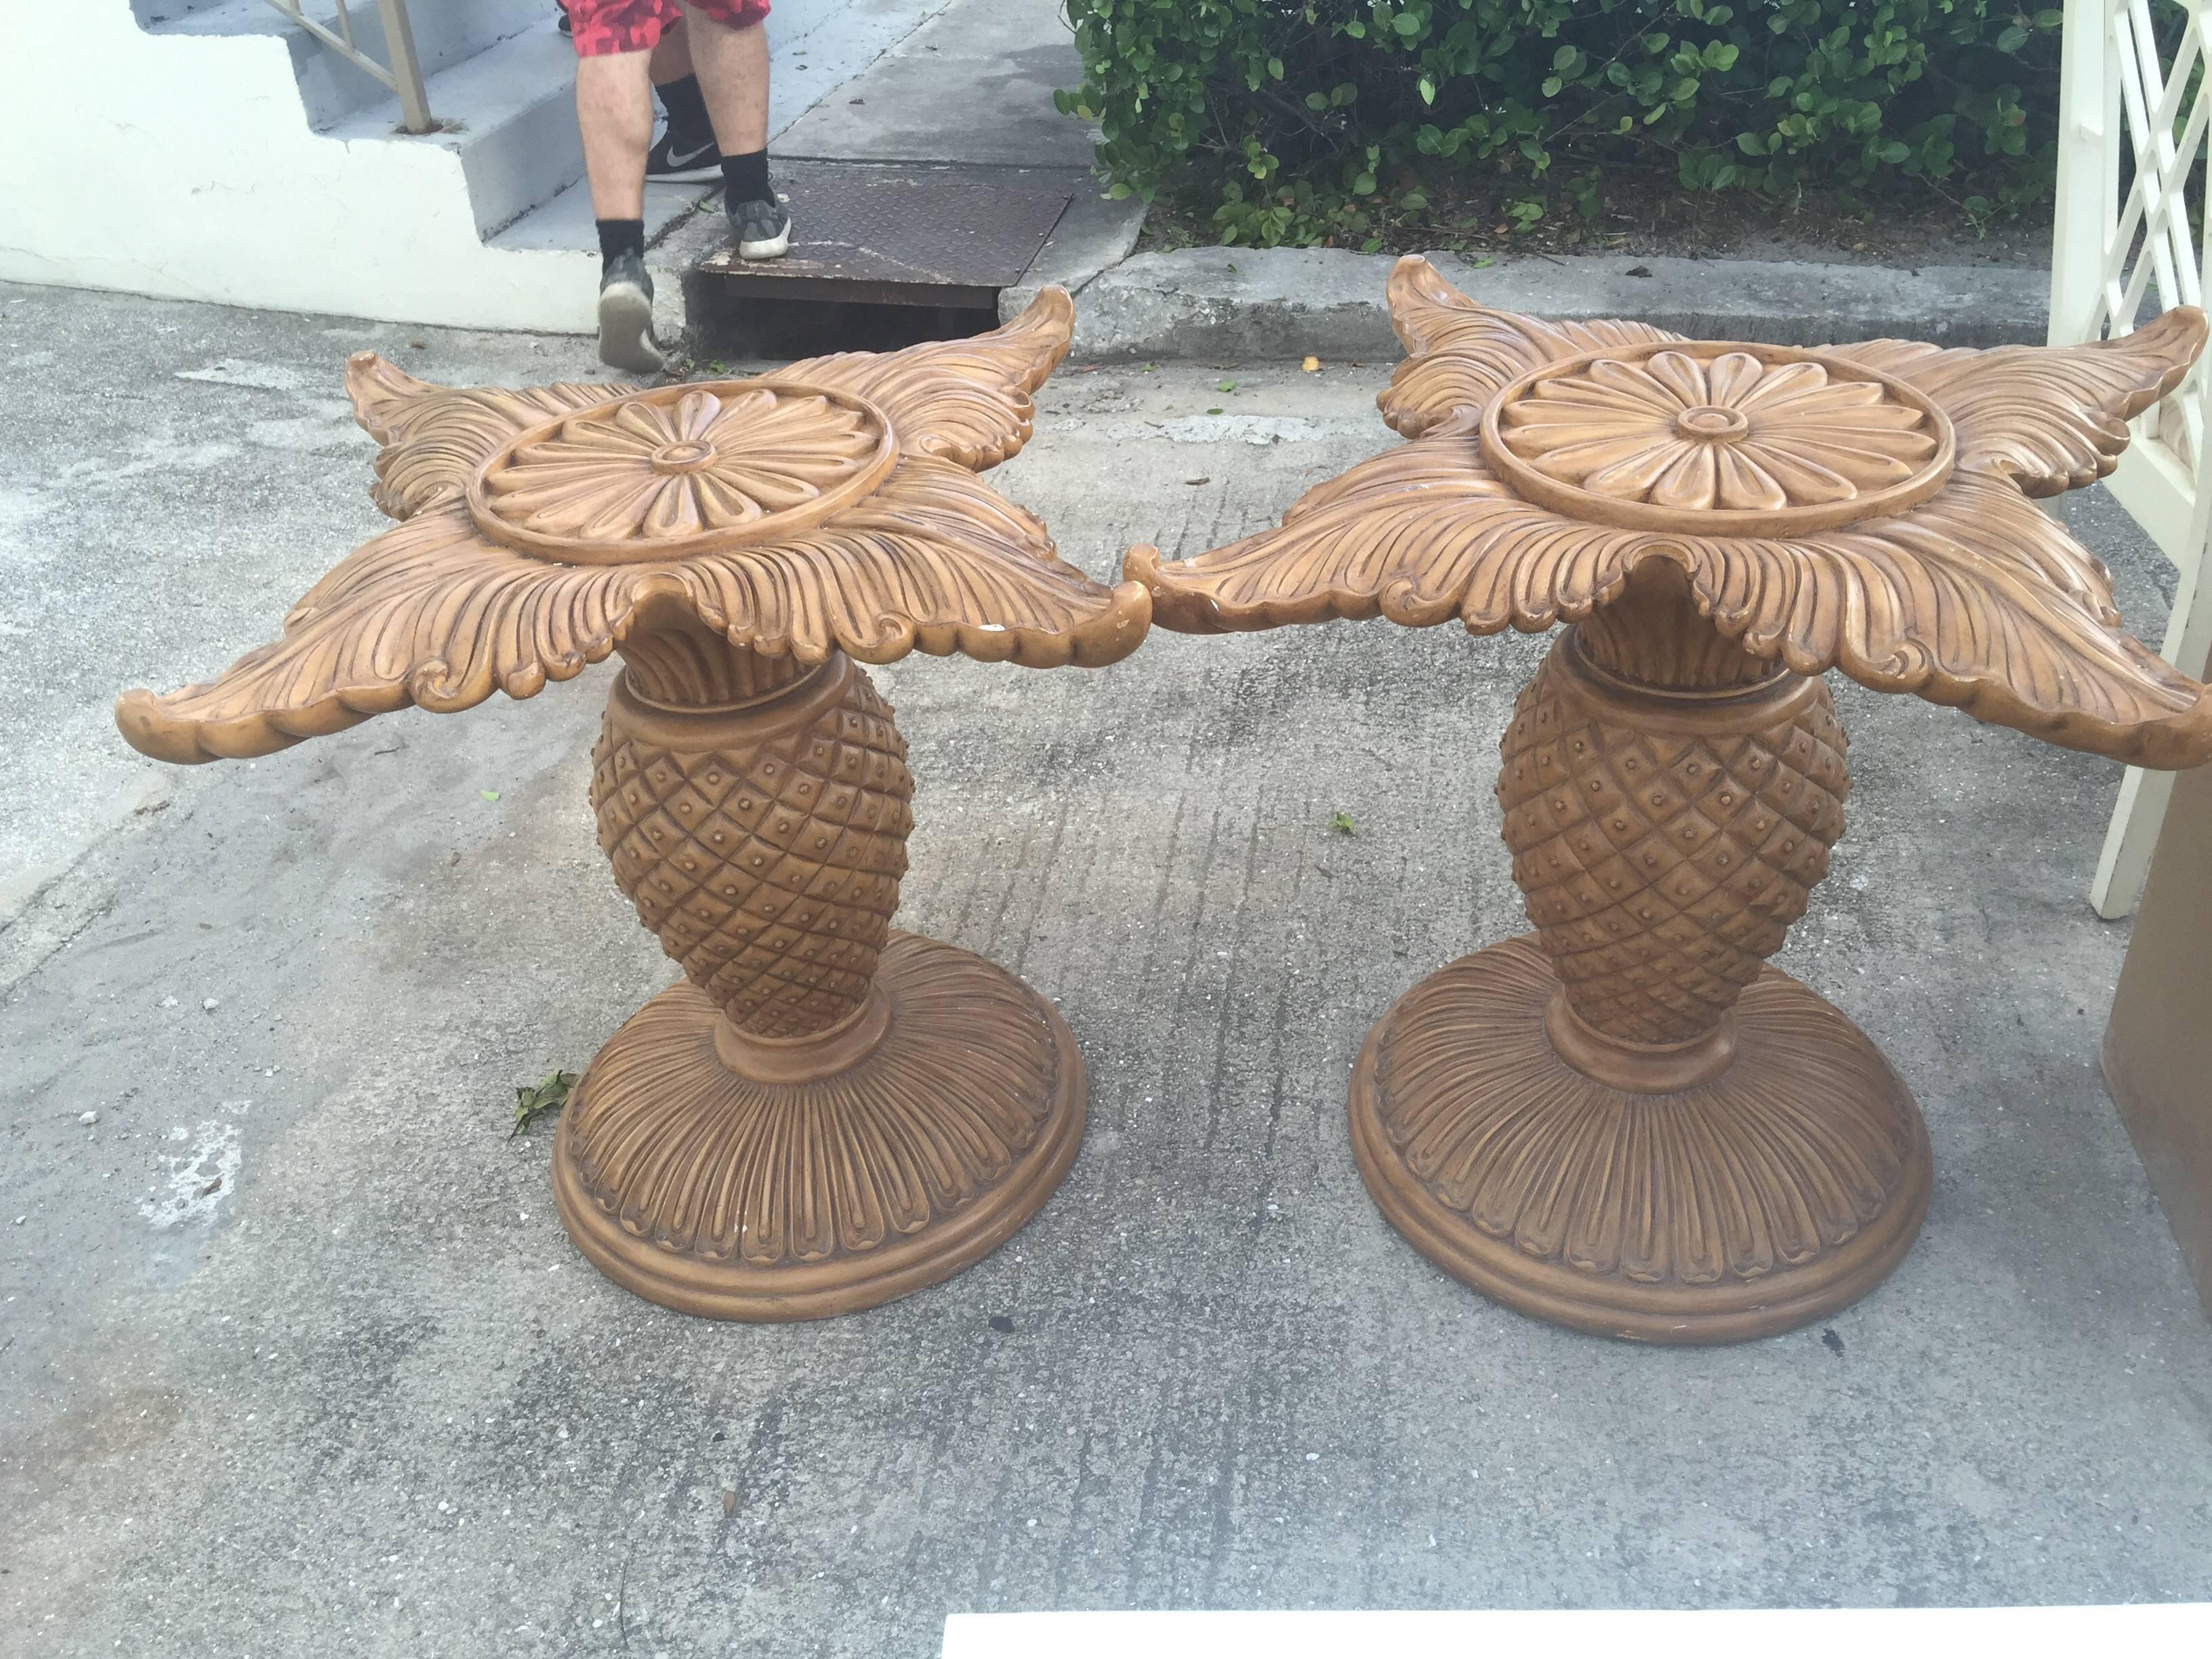 Lovely pair of vintage wood carved pineapple bases perfect for a dining table base or a desk base. Glass top not included. These can be left as is or lacquered a great color. If interested in lacquering please inquire. 
Tropical Island, Palm Beach,